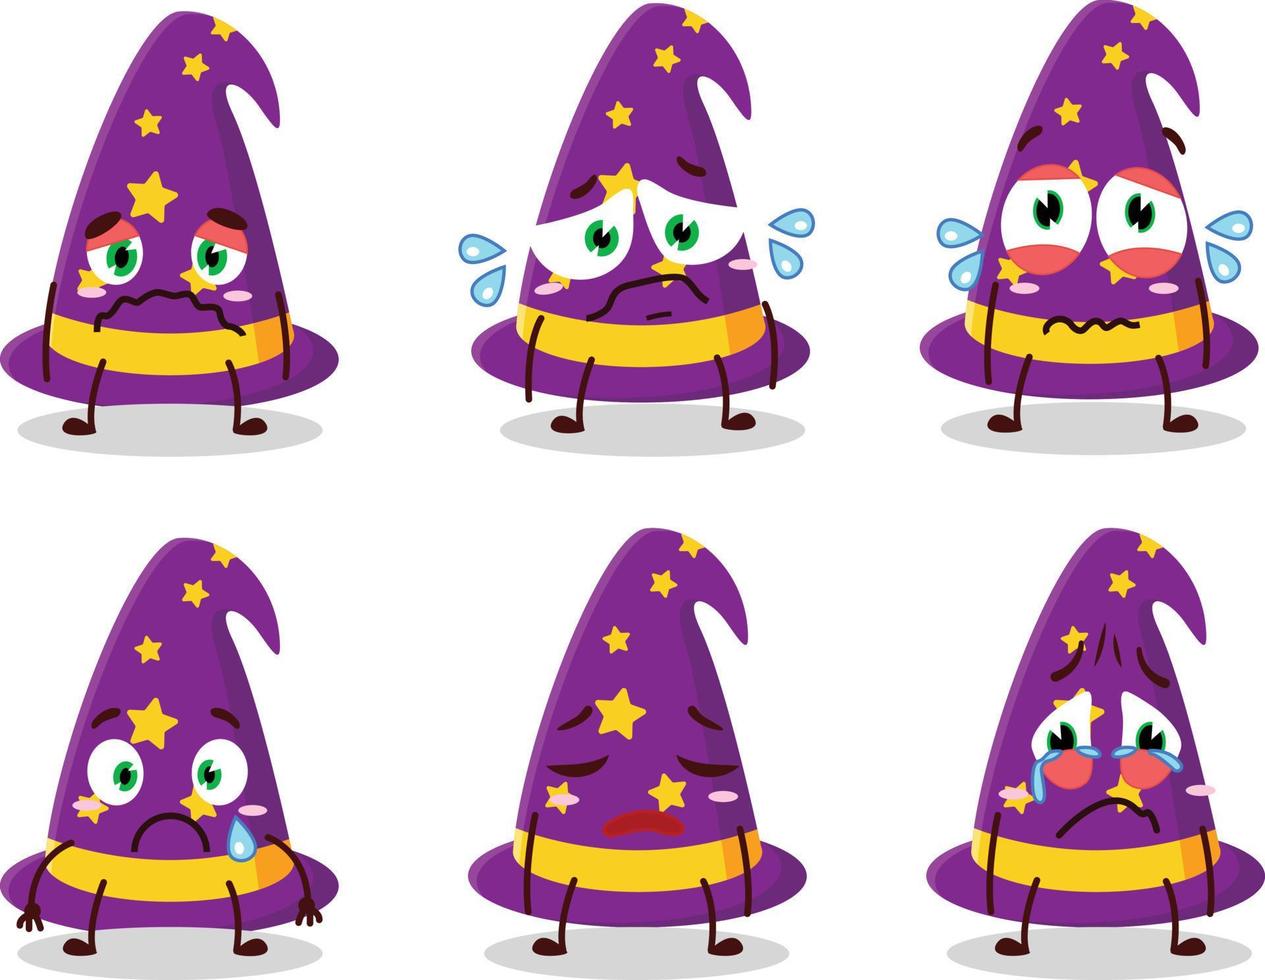 Wizard hat cartoon character with sad expression vector